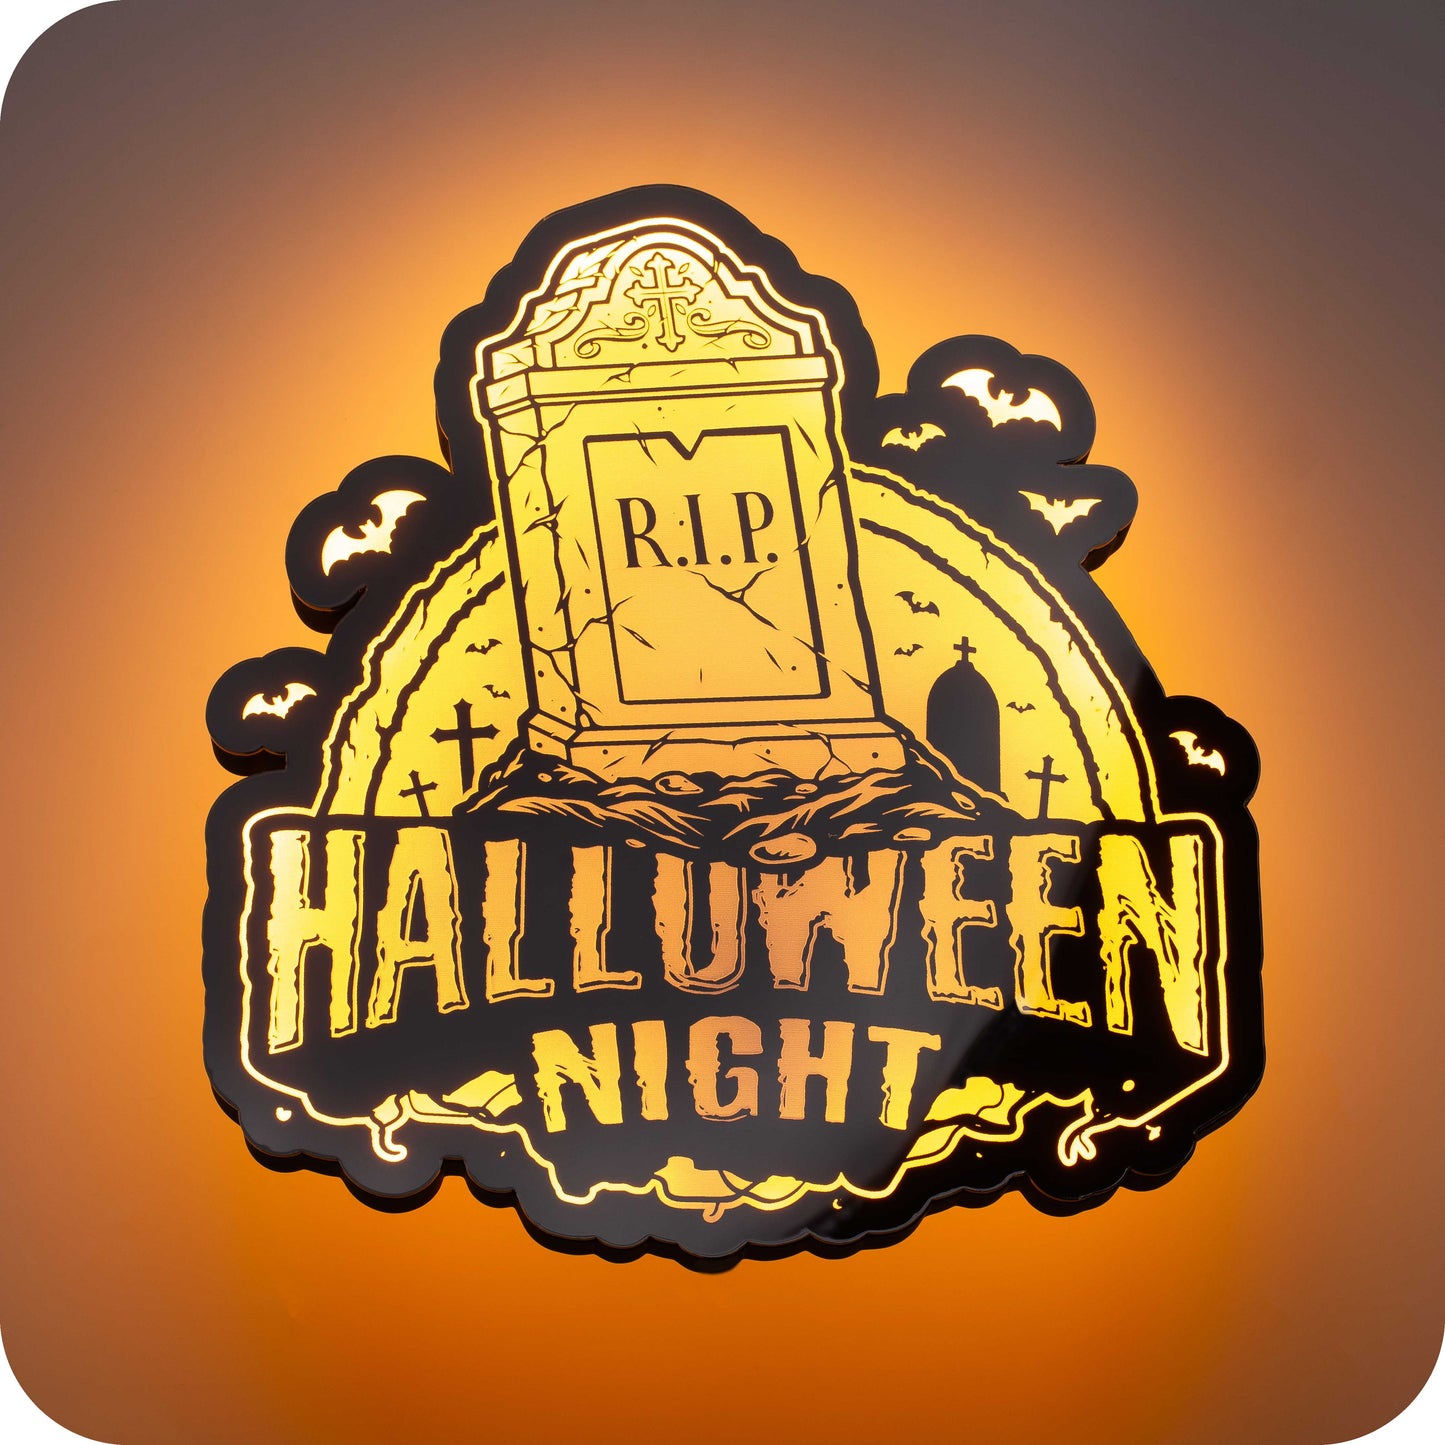 a 3d wall mounted acrylic light, backlit by orange multi-color led lights, featuring a cartoon style scary halloween themed illustration. A scary tomb stone rises up from a haunted grave yard scene complete with bats and spooky halloween themed text that reads "halloween night".